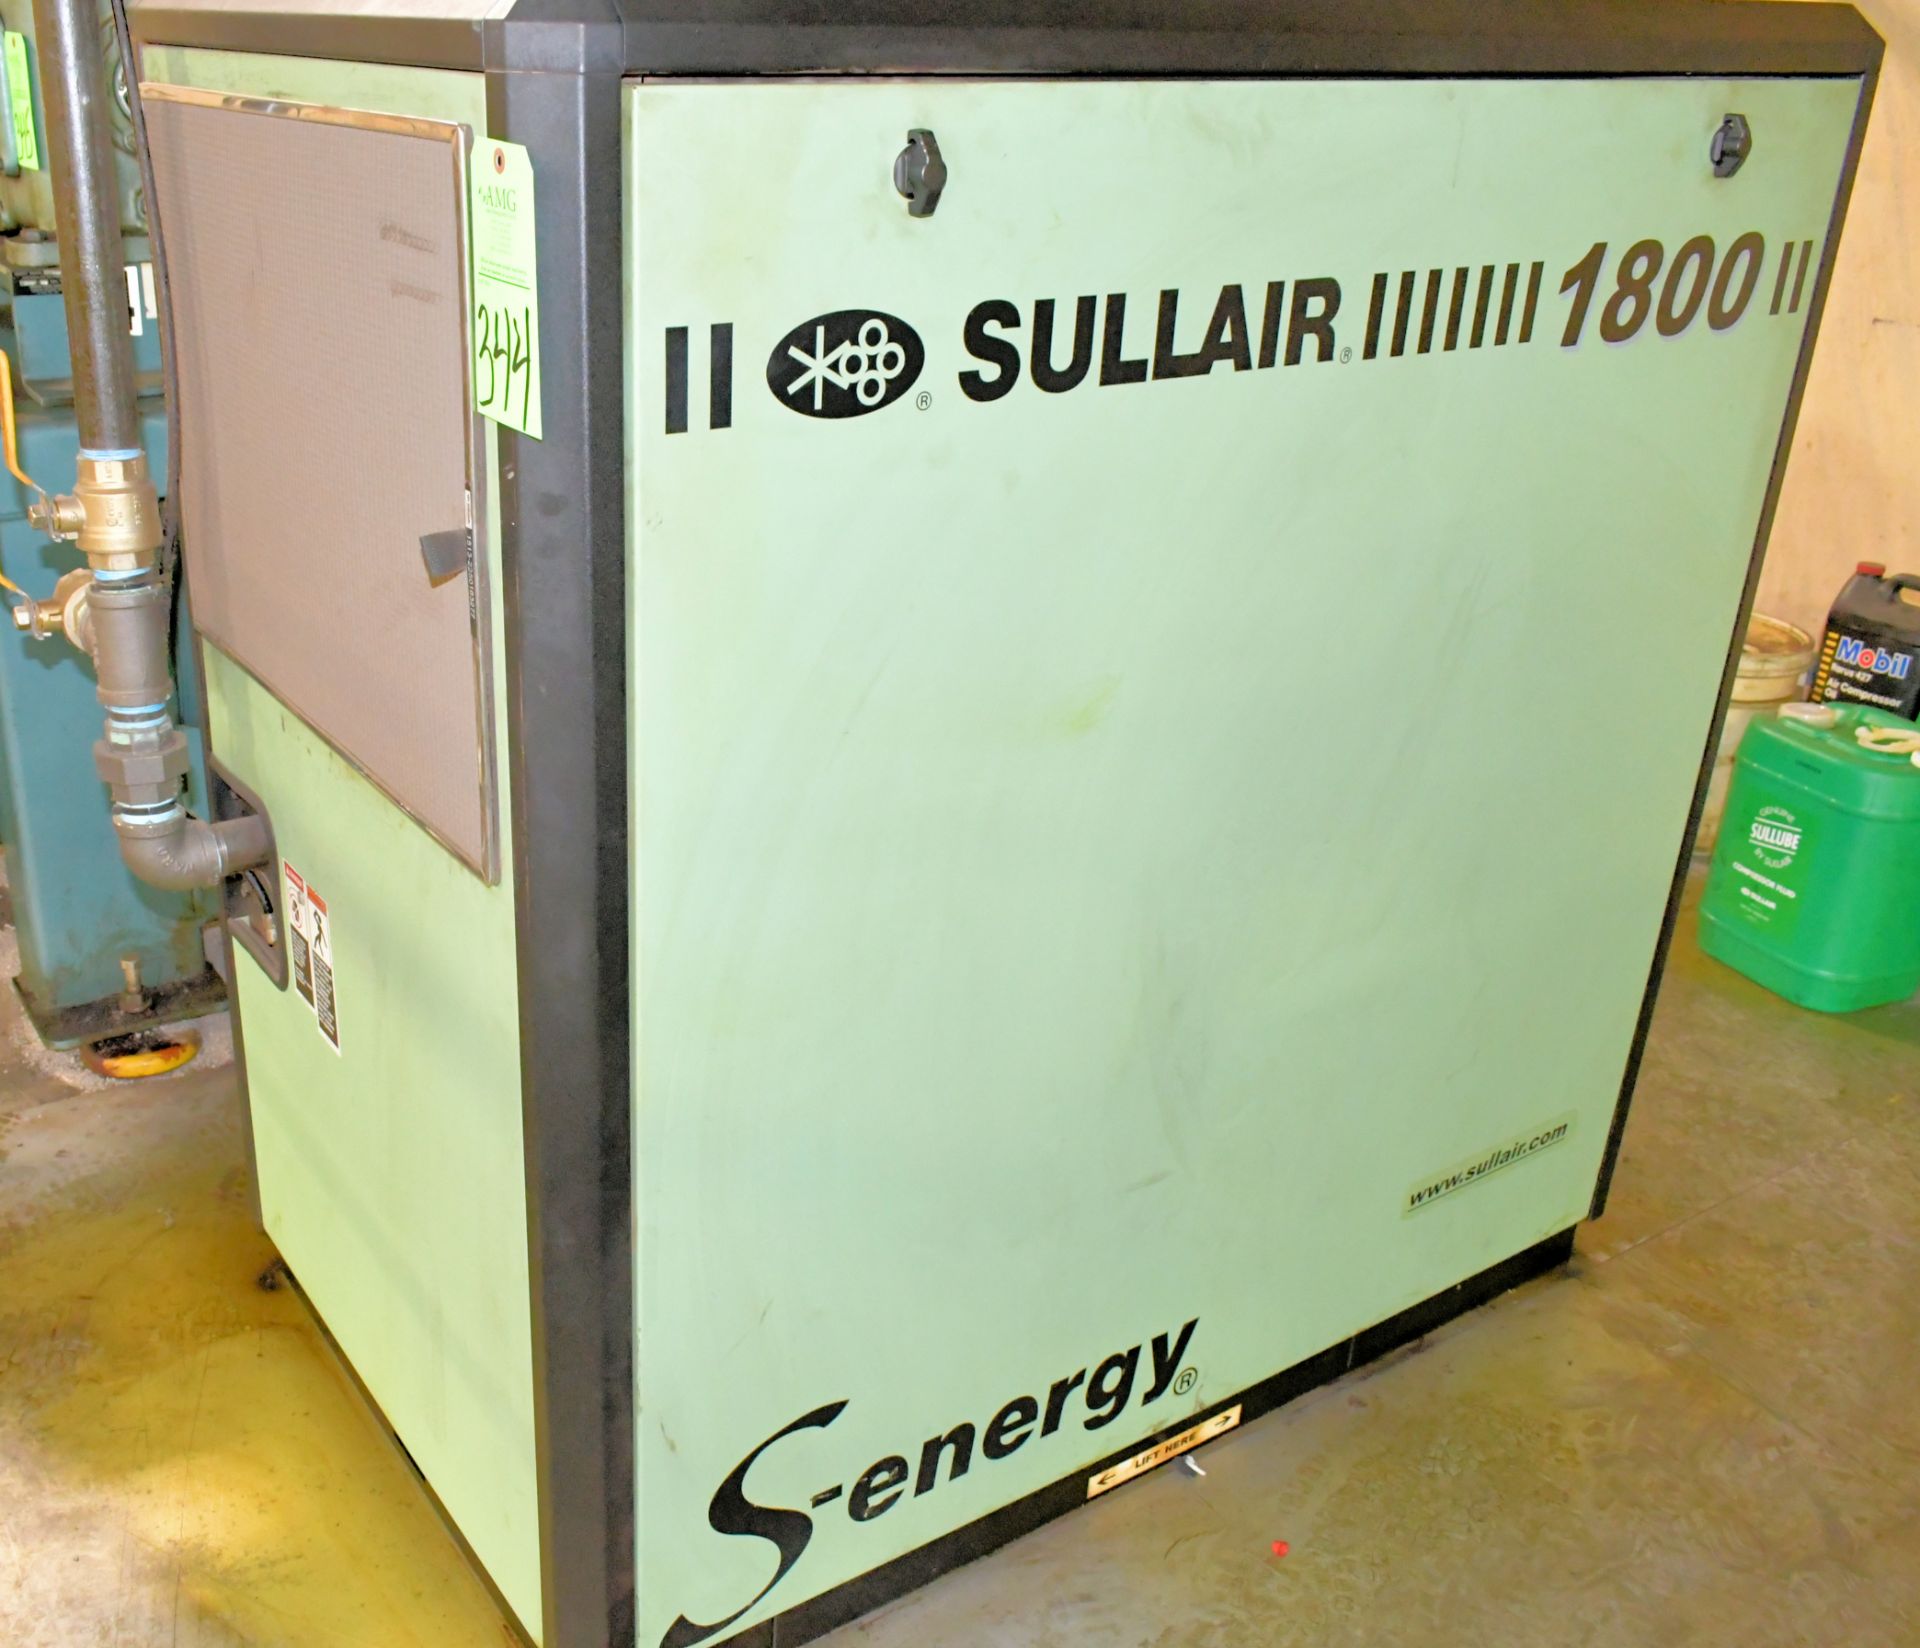 Sullair Model 1809 AC, 28.4 BHP, Rotary Screw Air Compressor, S/n 201406030055 (2014), (Upstairs - Image 2 of 3